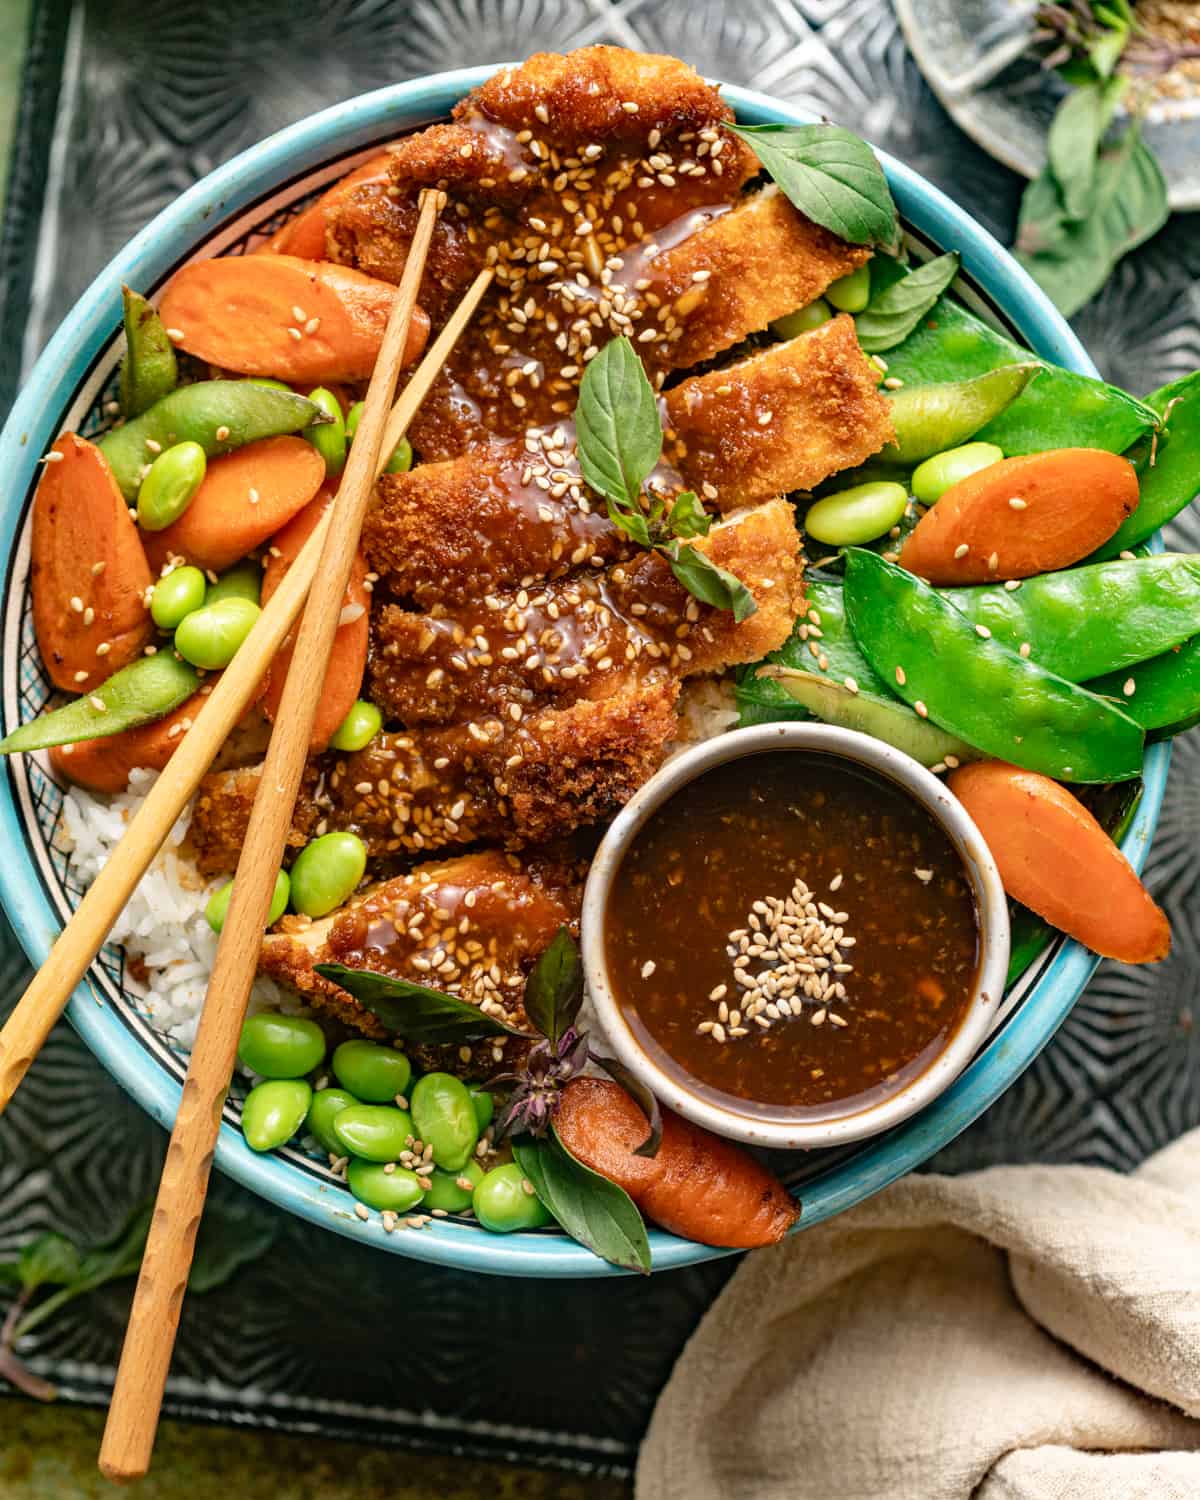 teriyaki chicken, edamame beans, carrots, snow peas, and rice in a large bowl with chopsticks and teriyaki sauce.